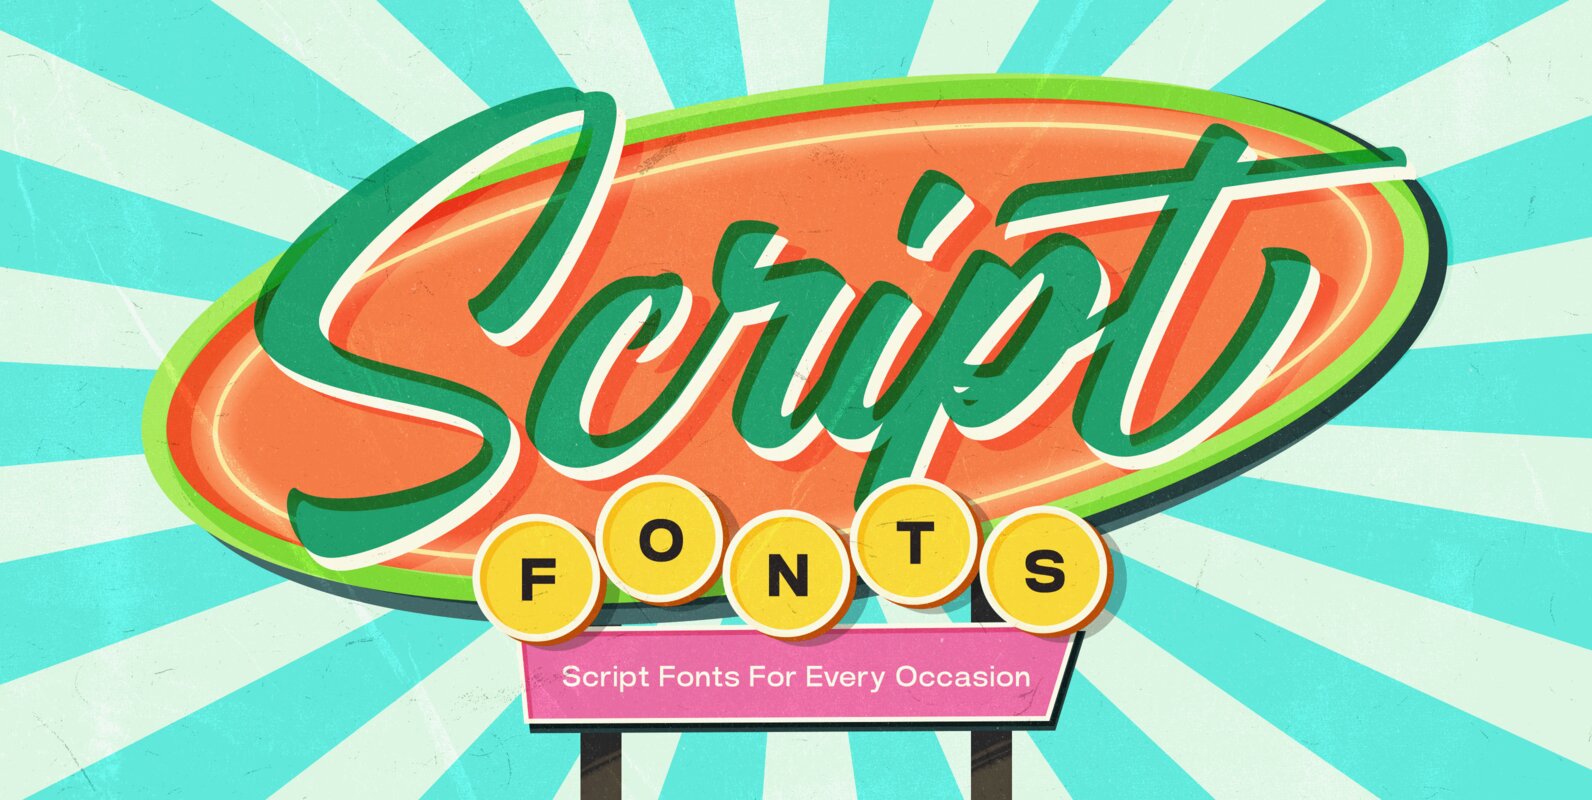 Script Fonts for Every Occasion